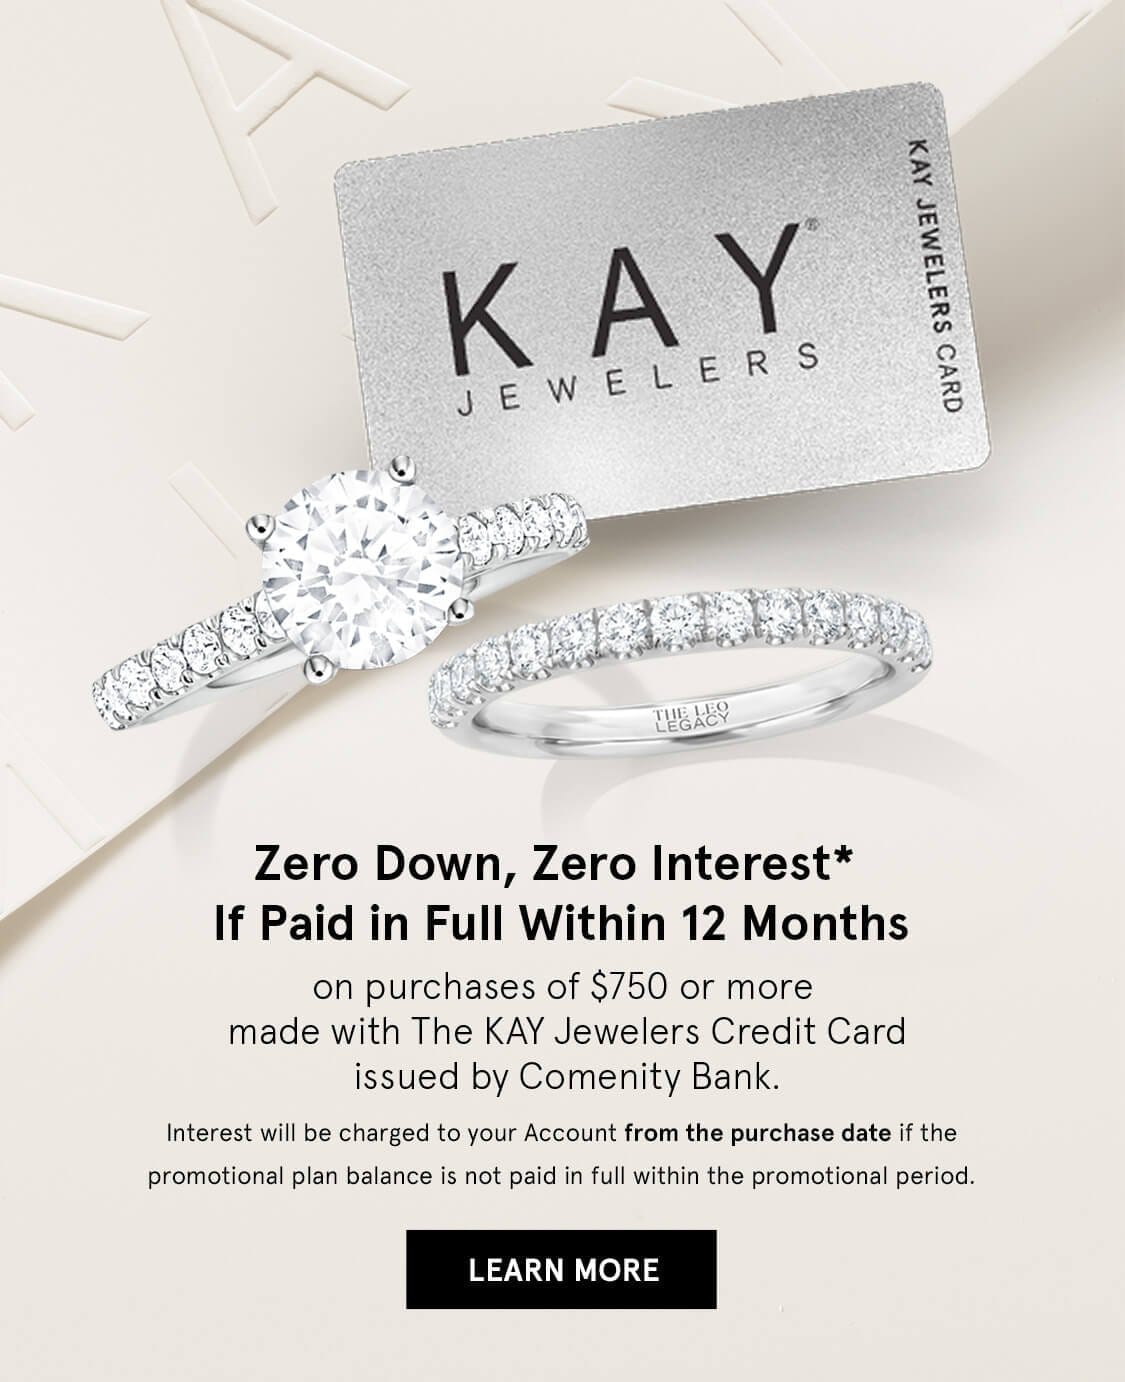 Zero Down, Zero Interest, If Paid In Full Within 12 Months. On Purchases of \\$750 or more made with The Kay Jewelers Credit Card. LEARN MORE